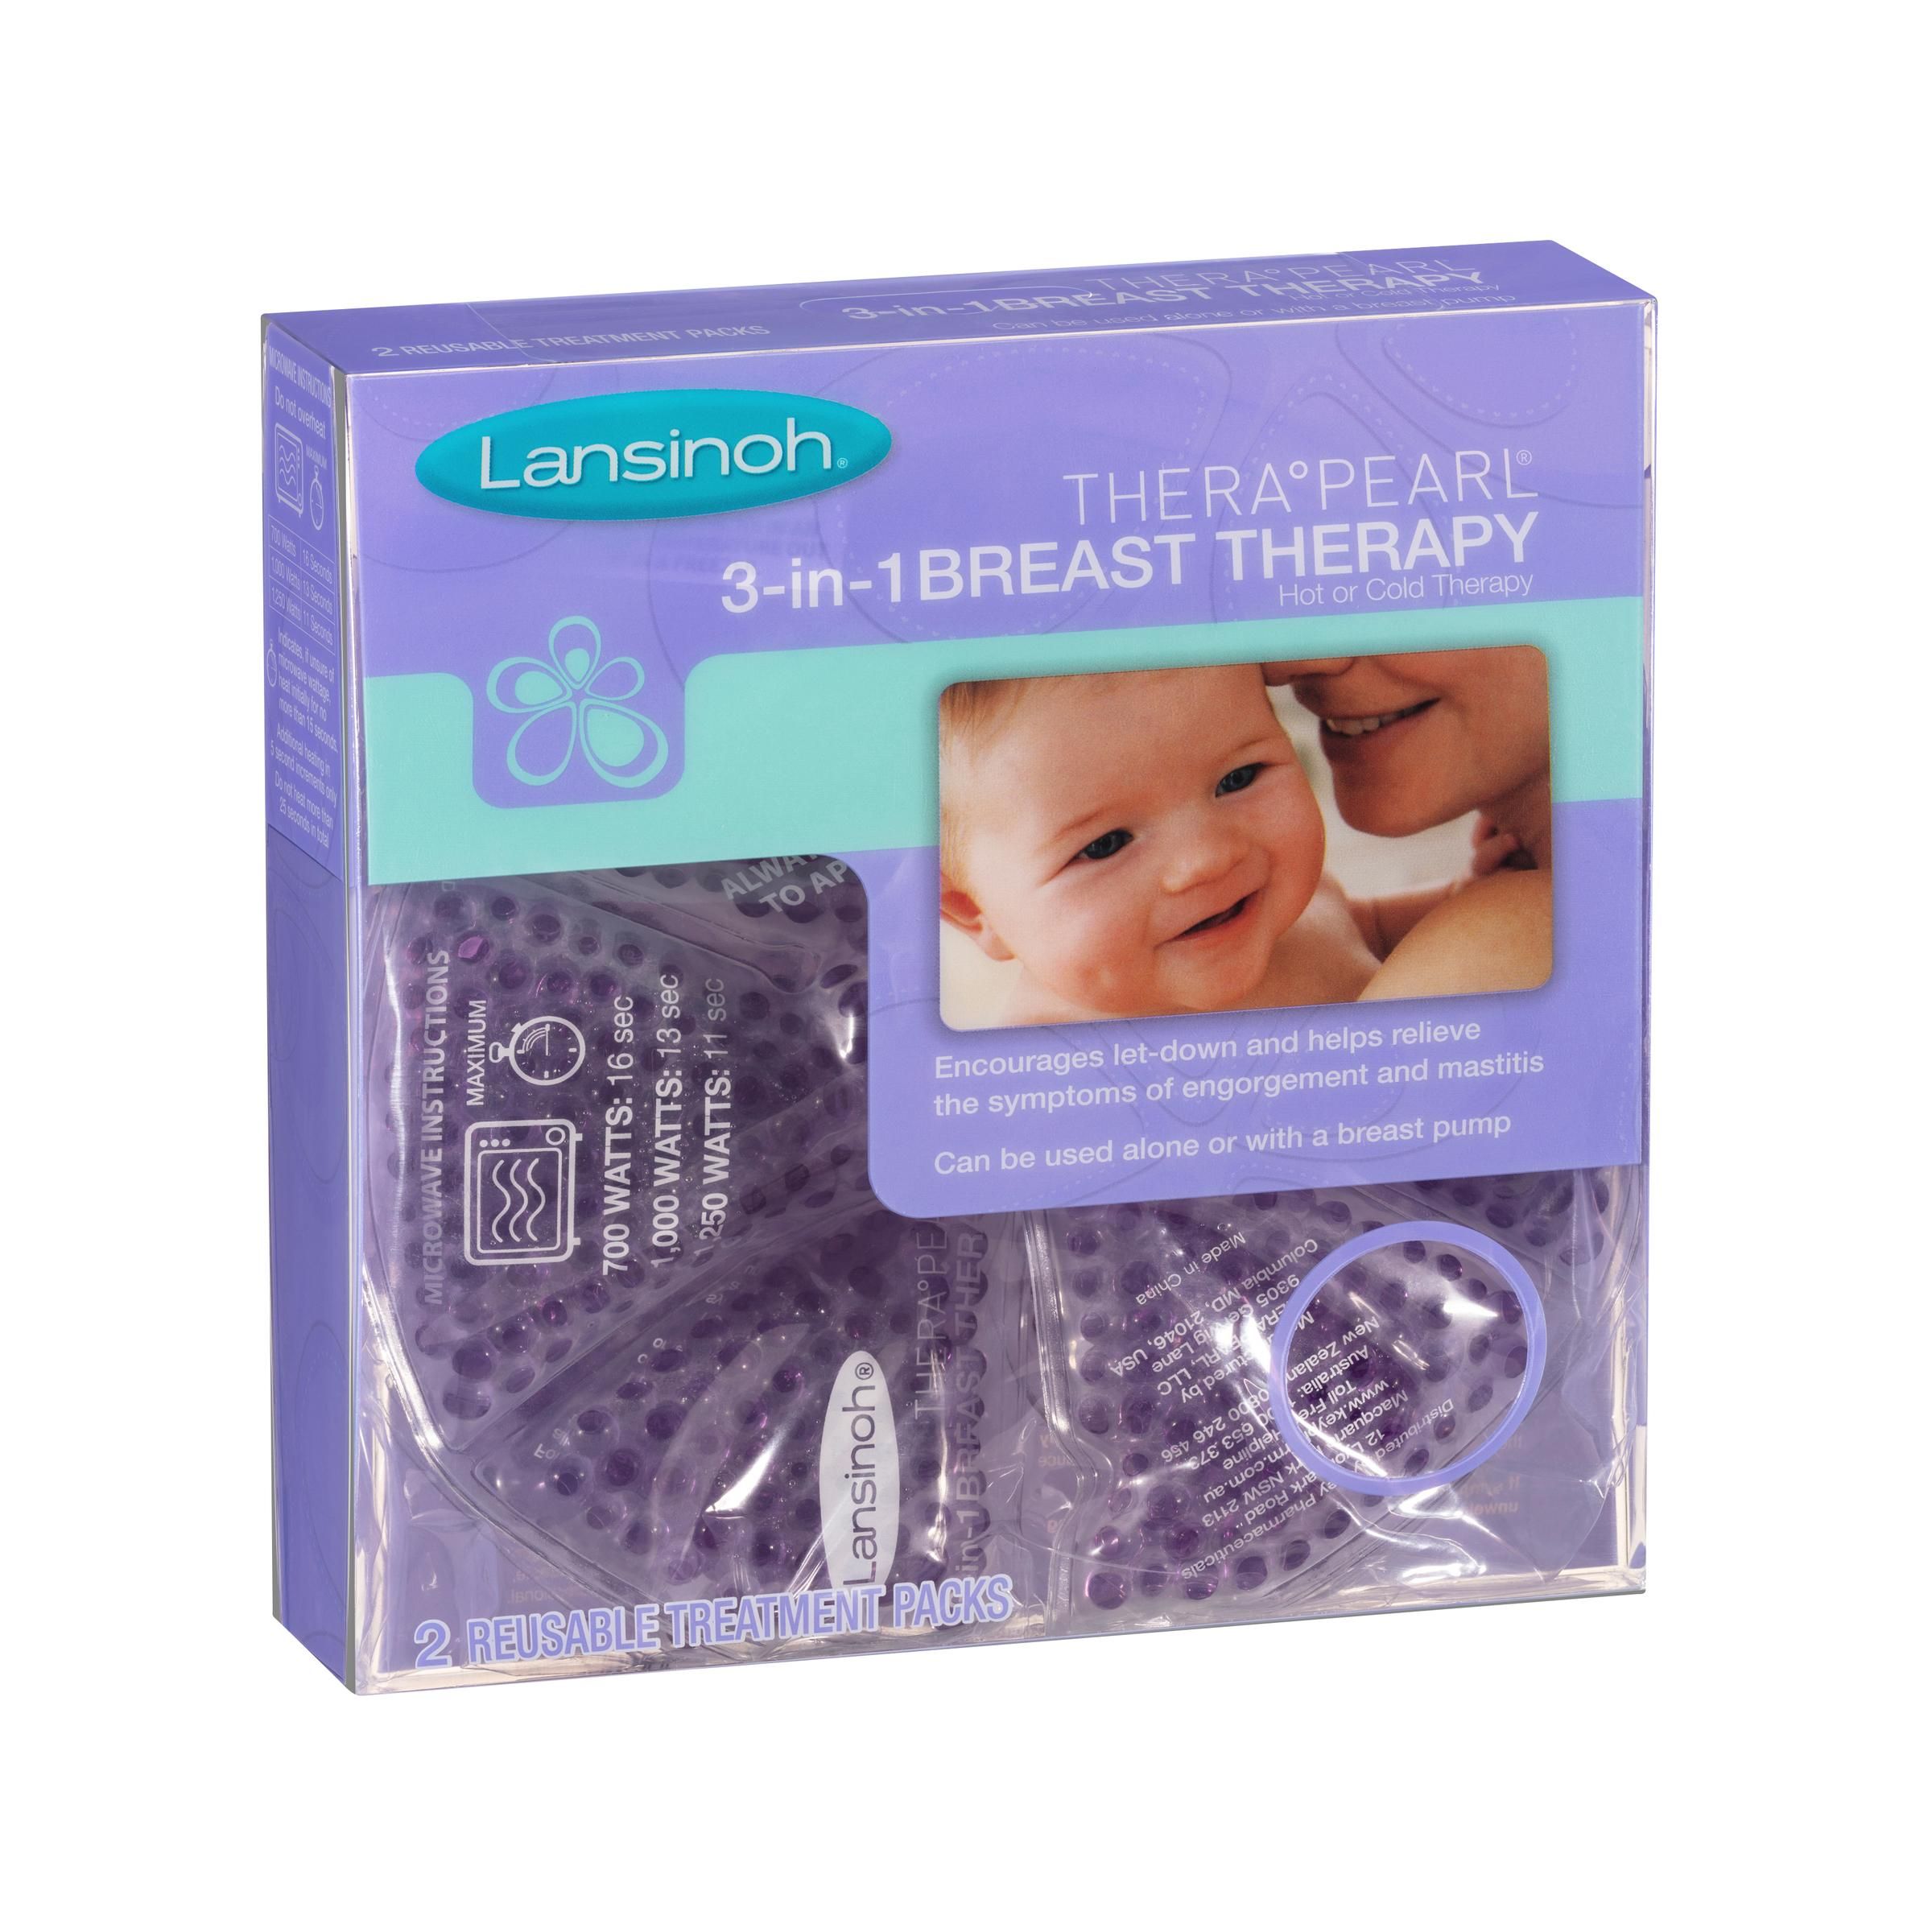 Lansinoh Therapearl Breast Therapy Packs PLUS Storage Bags And Pads  Washable